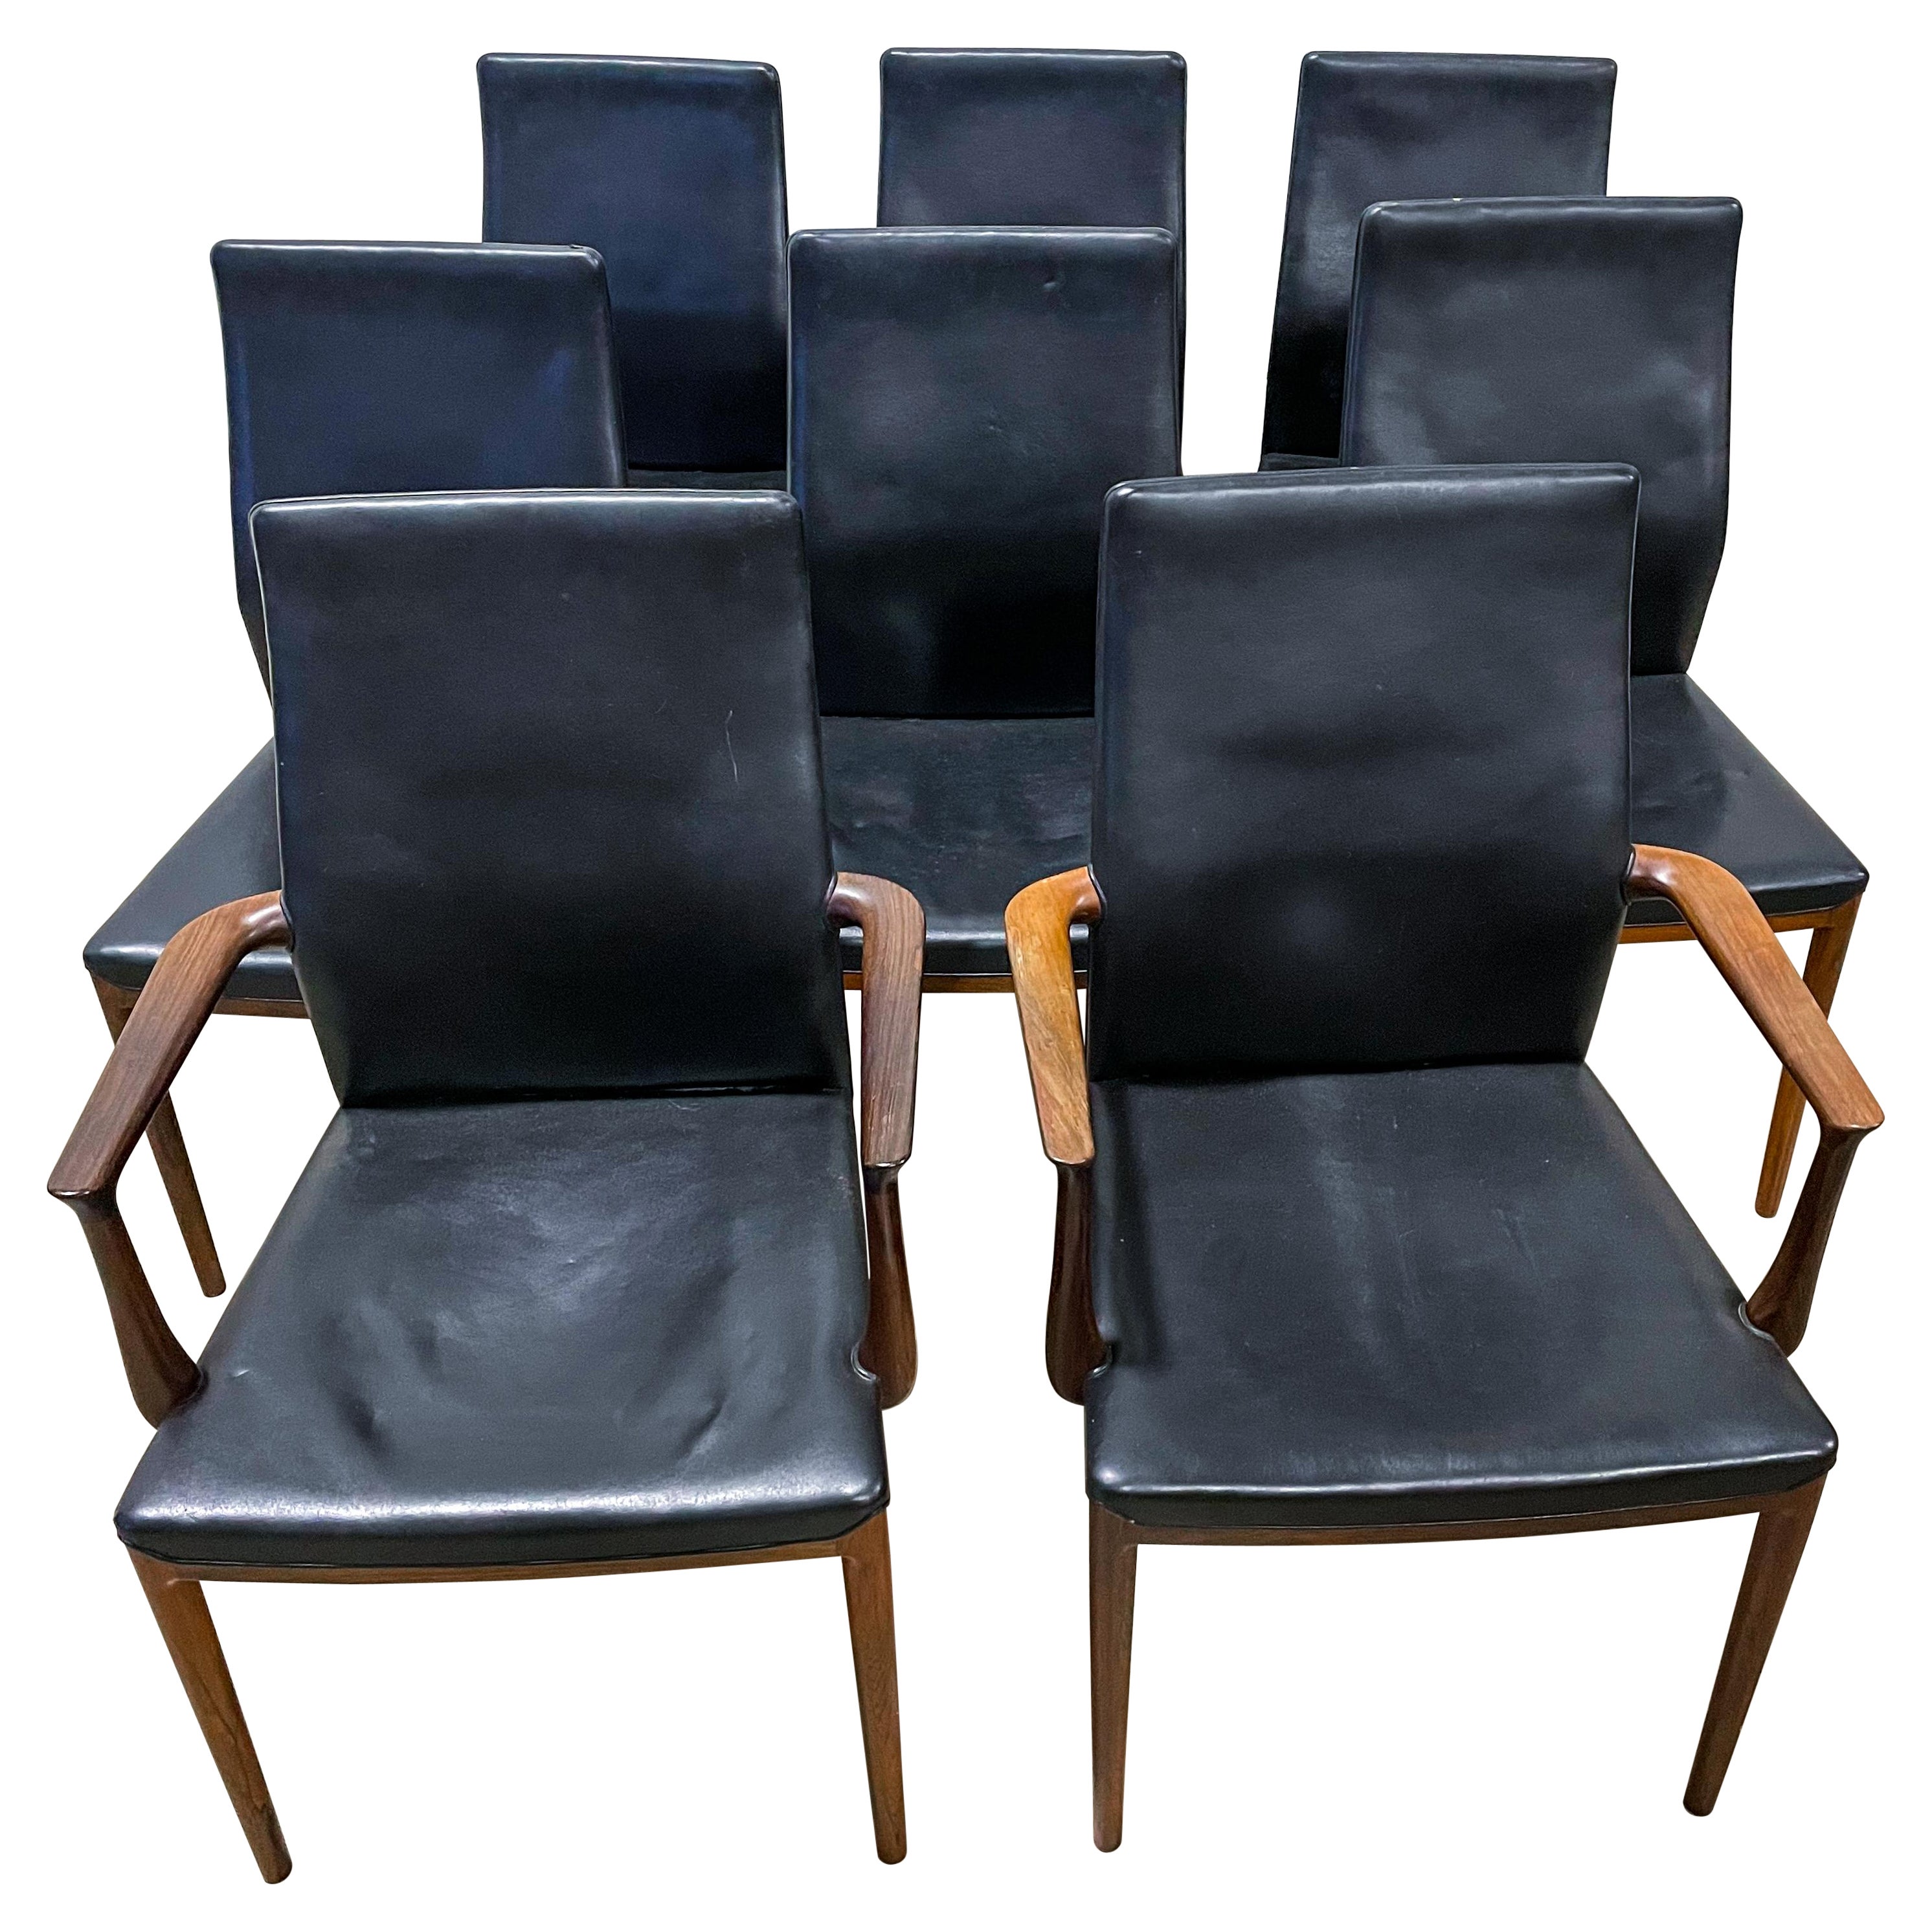 Very rare solid rosewood dining chairs made by Soren Horn and designed by Helge Vestergaard Jensen. Superbly sculpted arms with seamless joints and excellent leather work, these chairs are a cut above the rest. Sought after due to their super thin